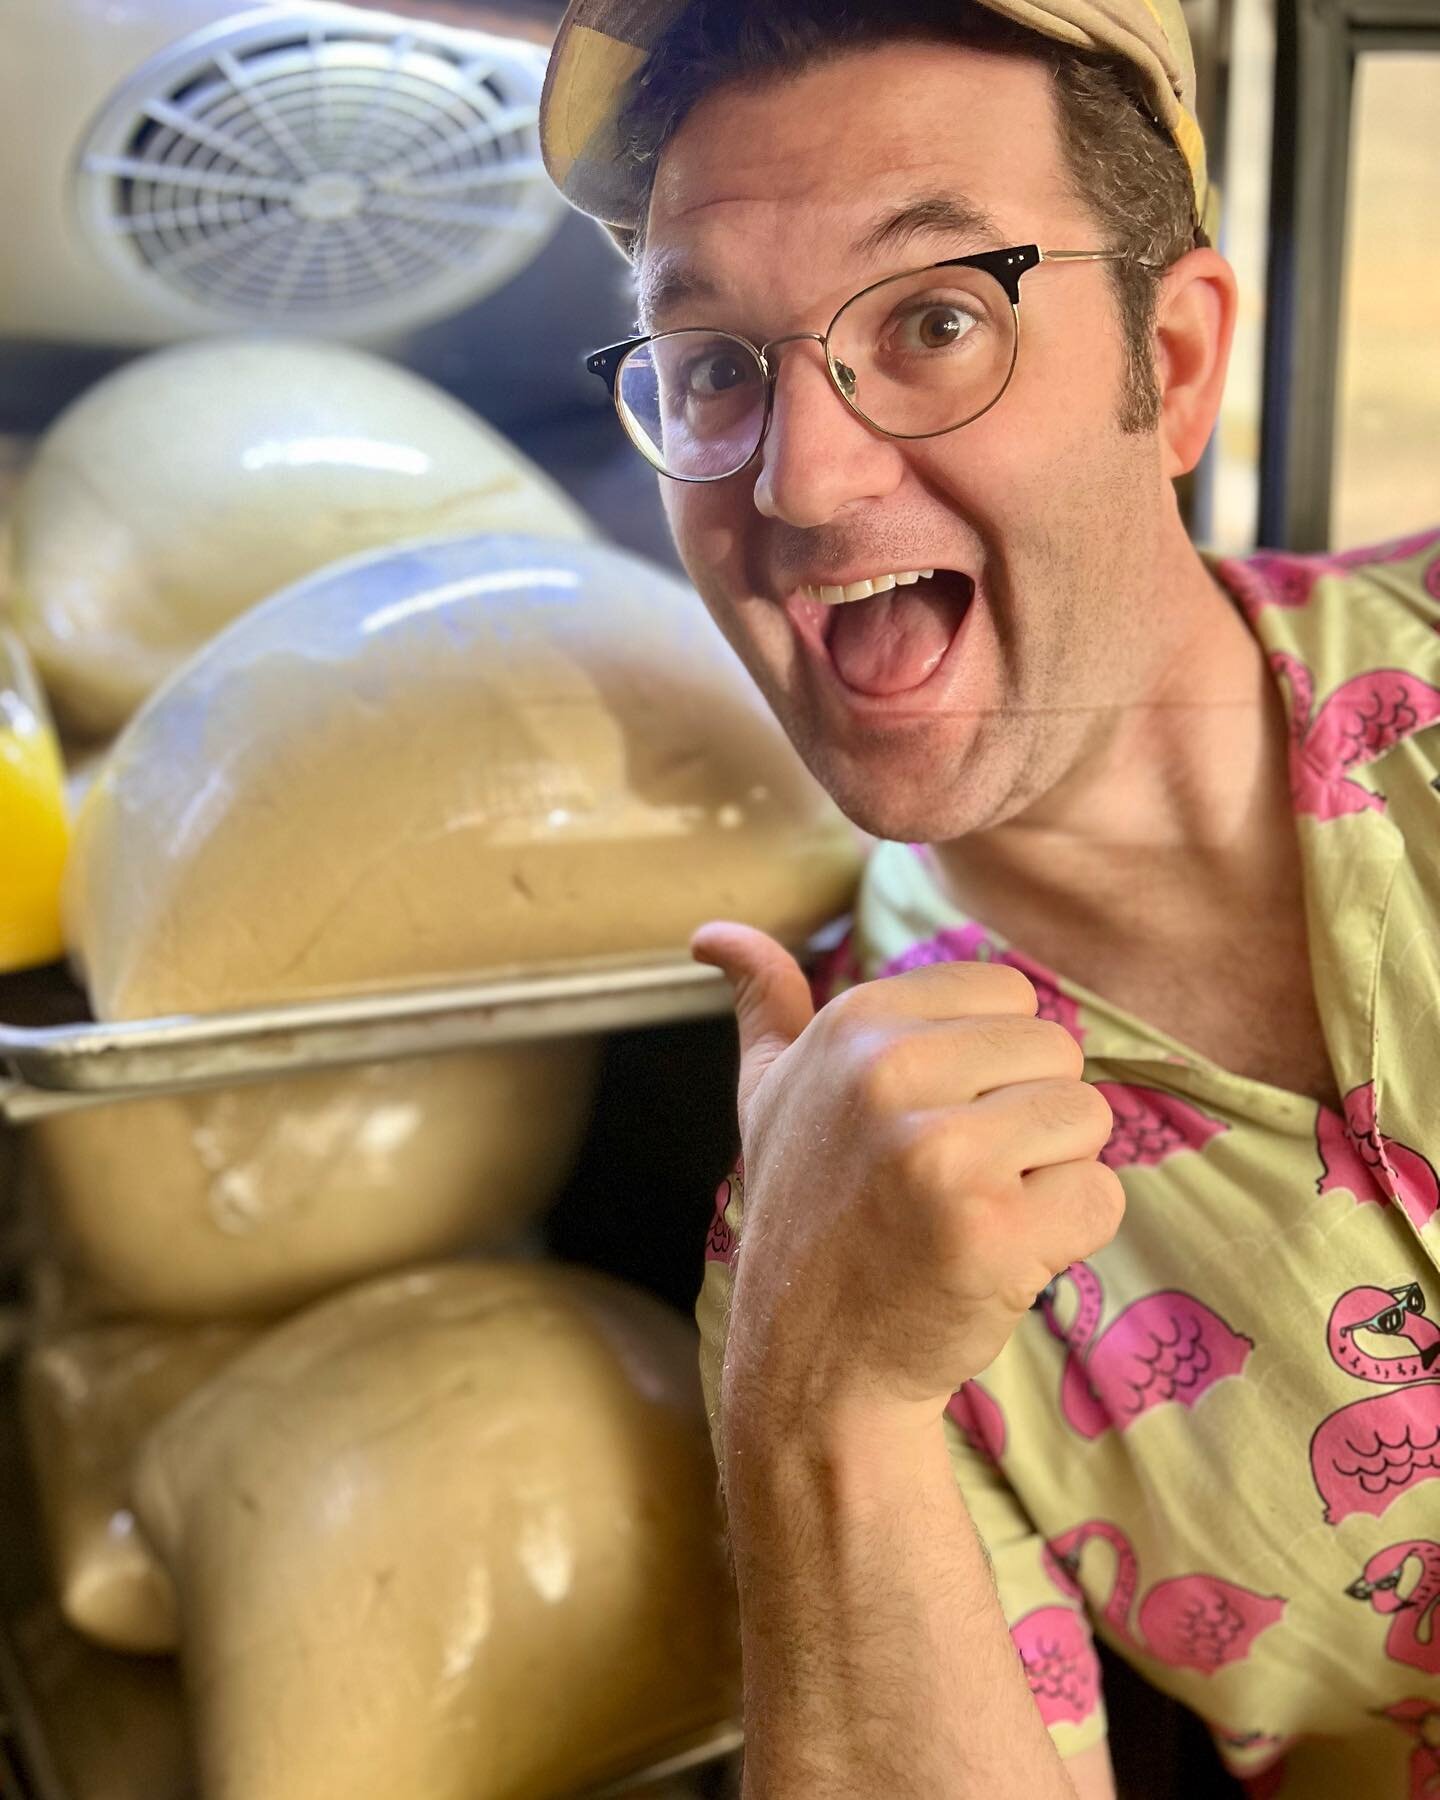 Heeeeyyyyyy! We&rsquo;re dough-ing great with all the love and support from you all. We&rsquo;re frantically working on making bonbons and filling online orders as well as making all this dough for our epic croissant Saturday! Most of our pre-orders 